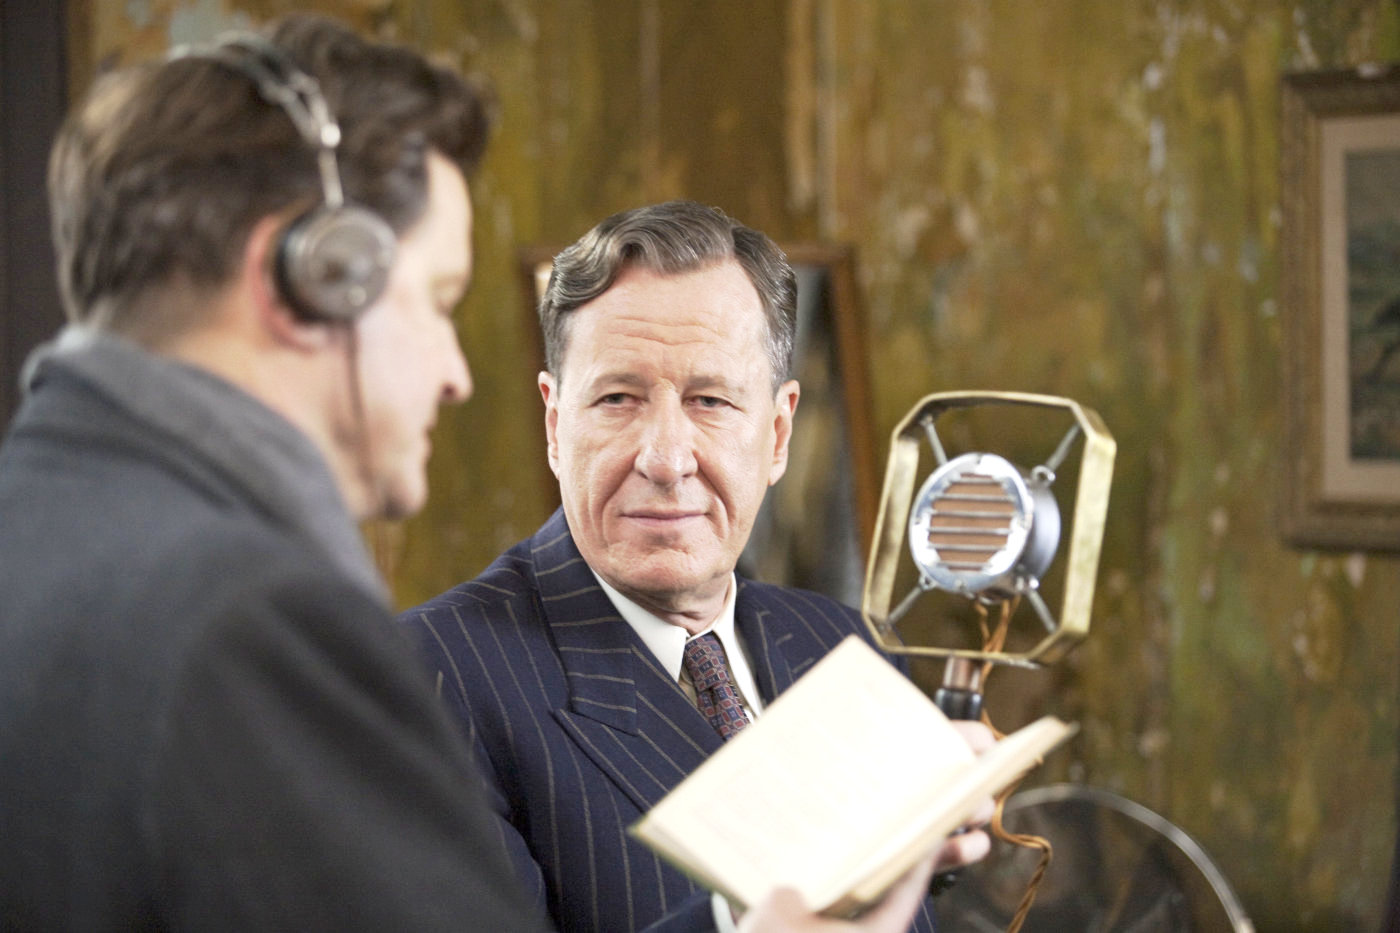 Colin Firth stars as King George VI and Geoffrey Rush stars as Lionel Logue in The Weinstein Company's The King's Speech (2010)